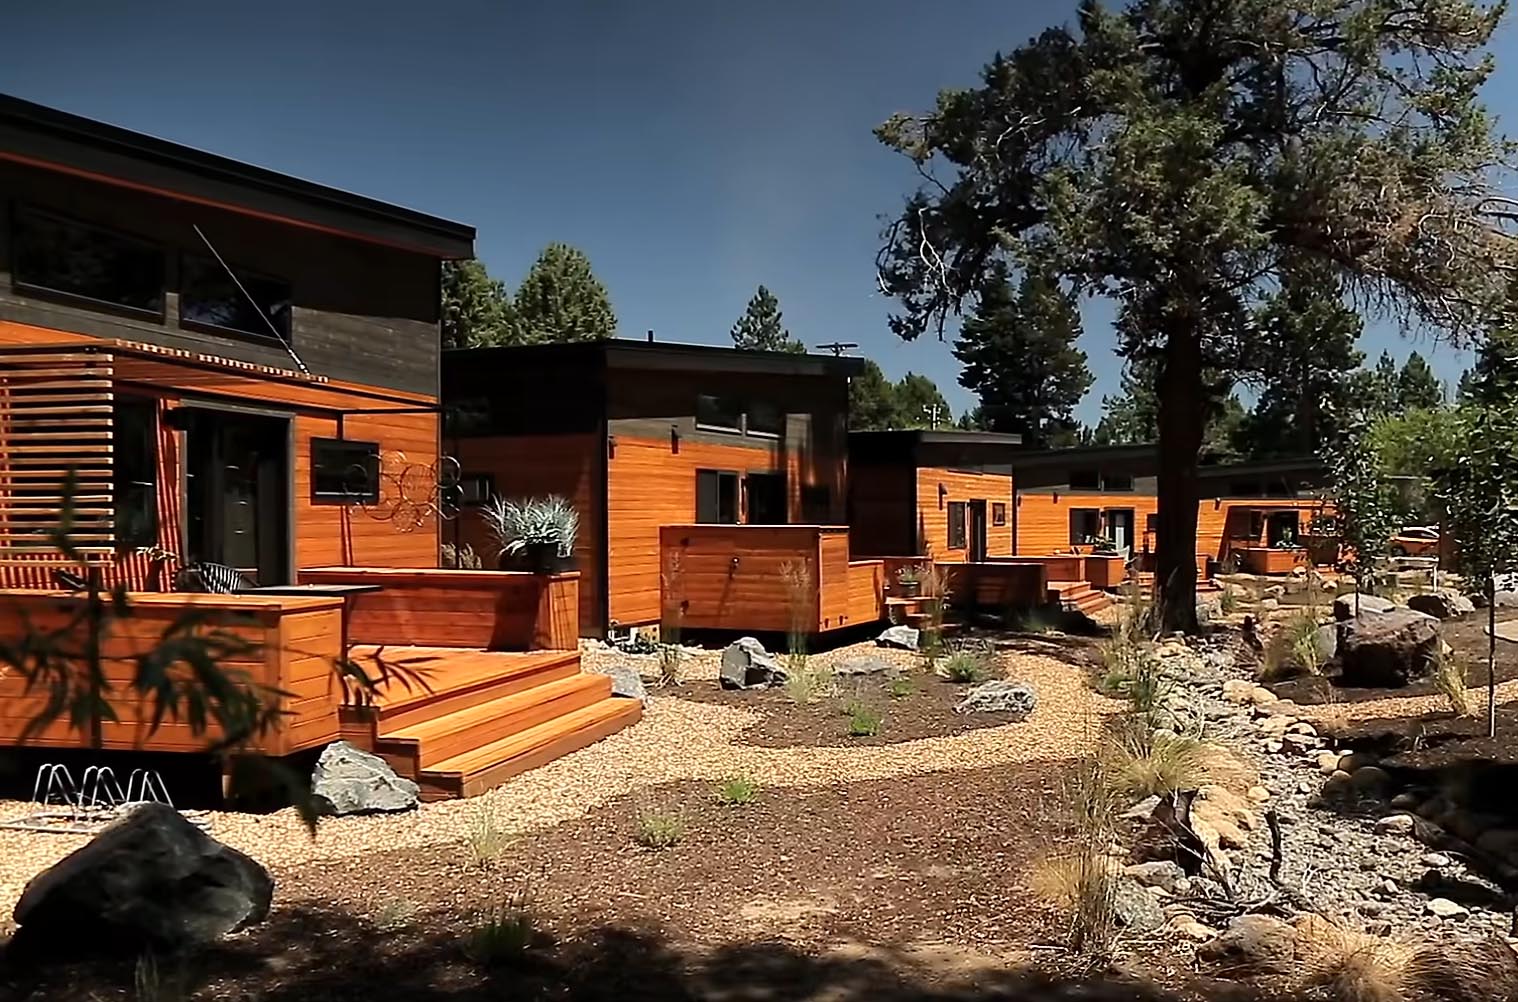 This Tiny House Community Feels Like Living In A Small Village | Home